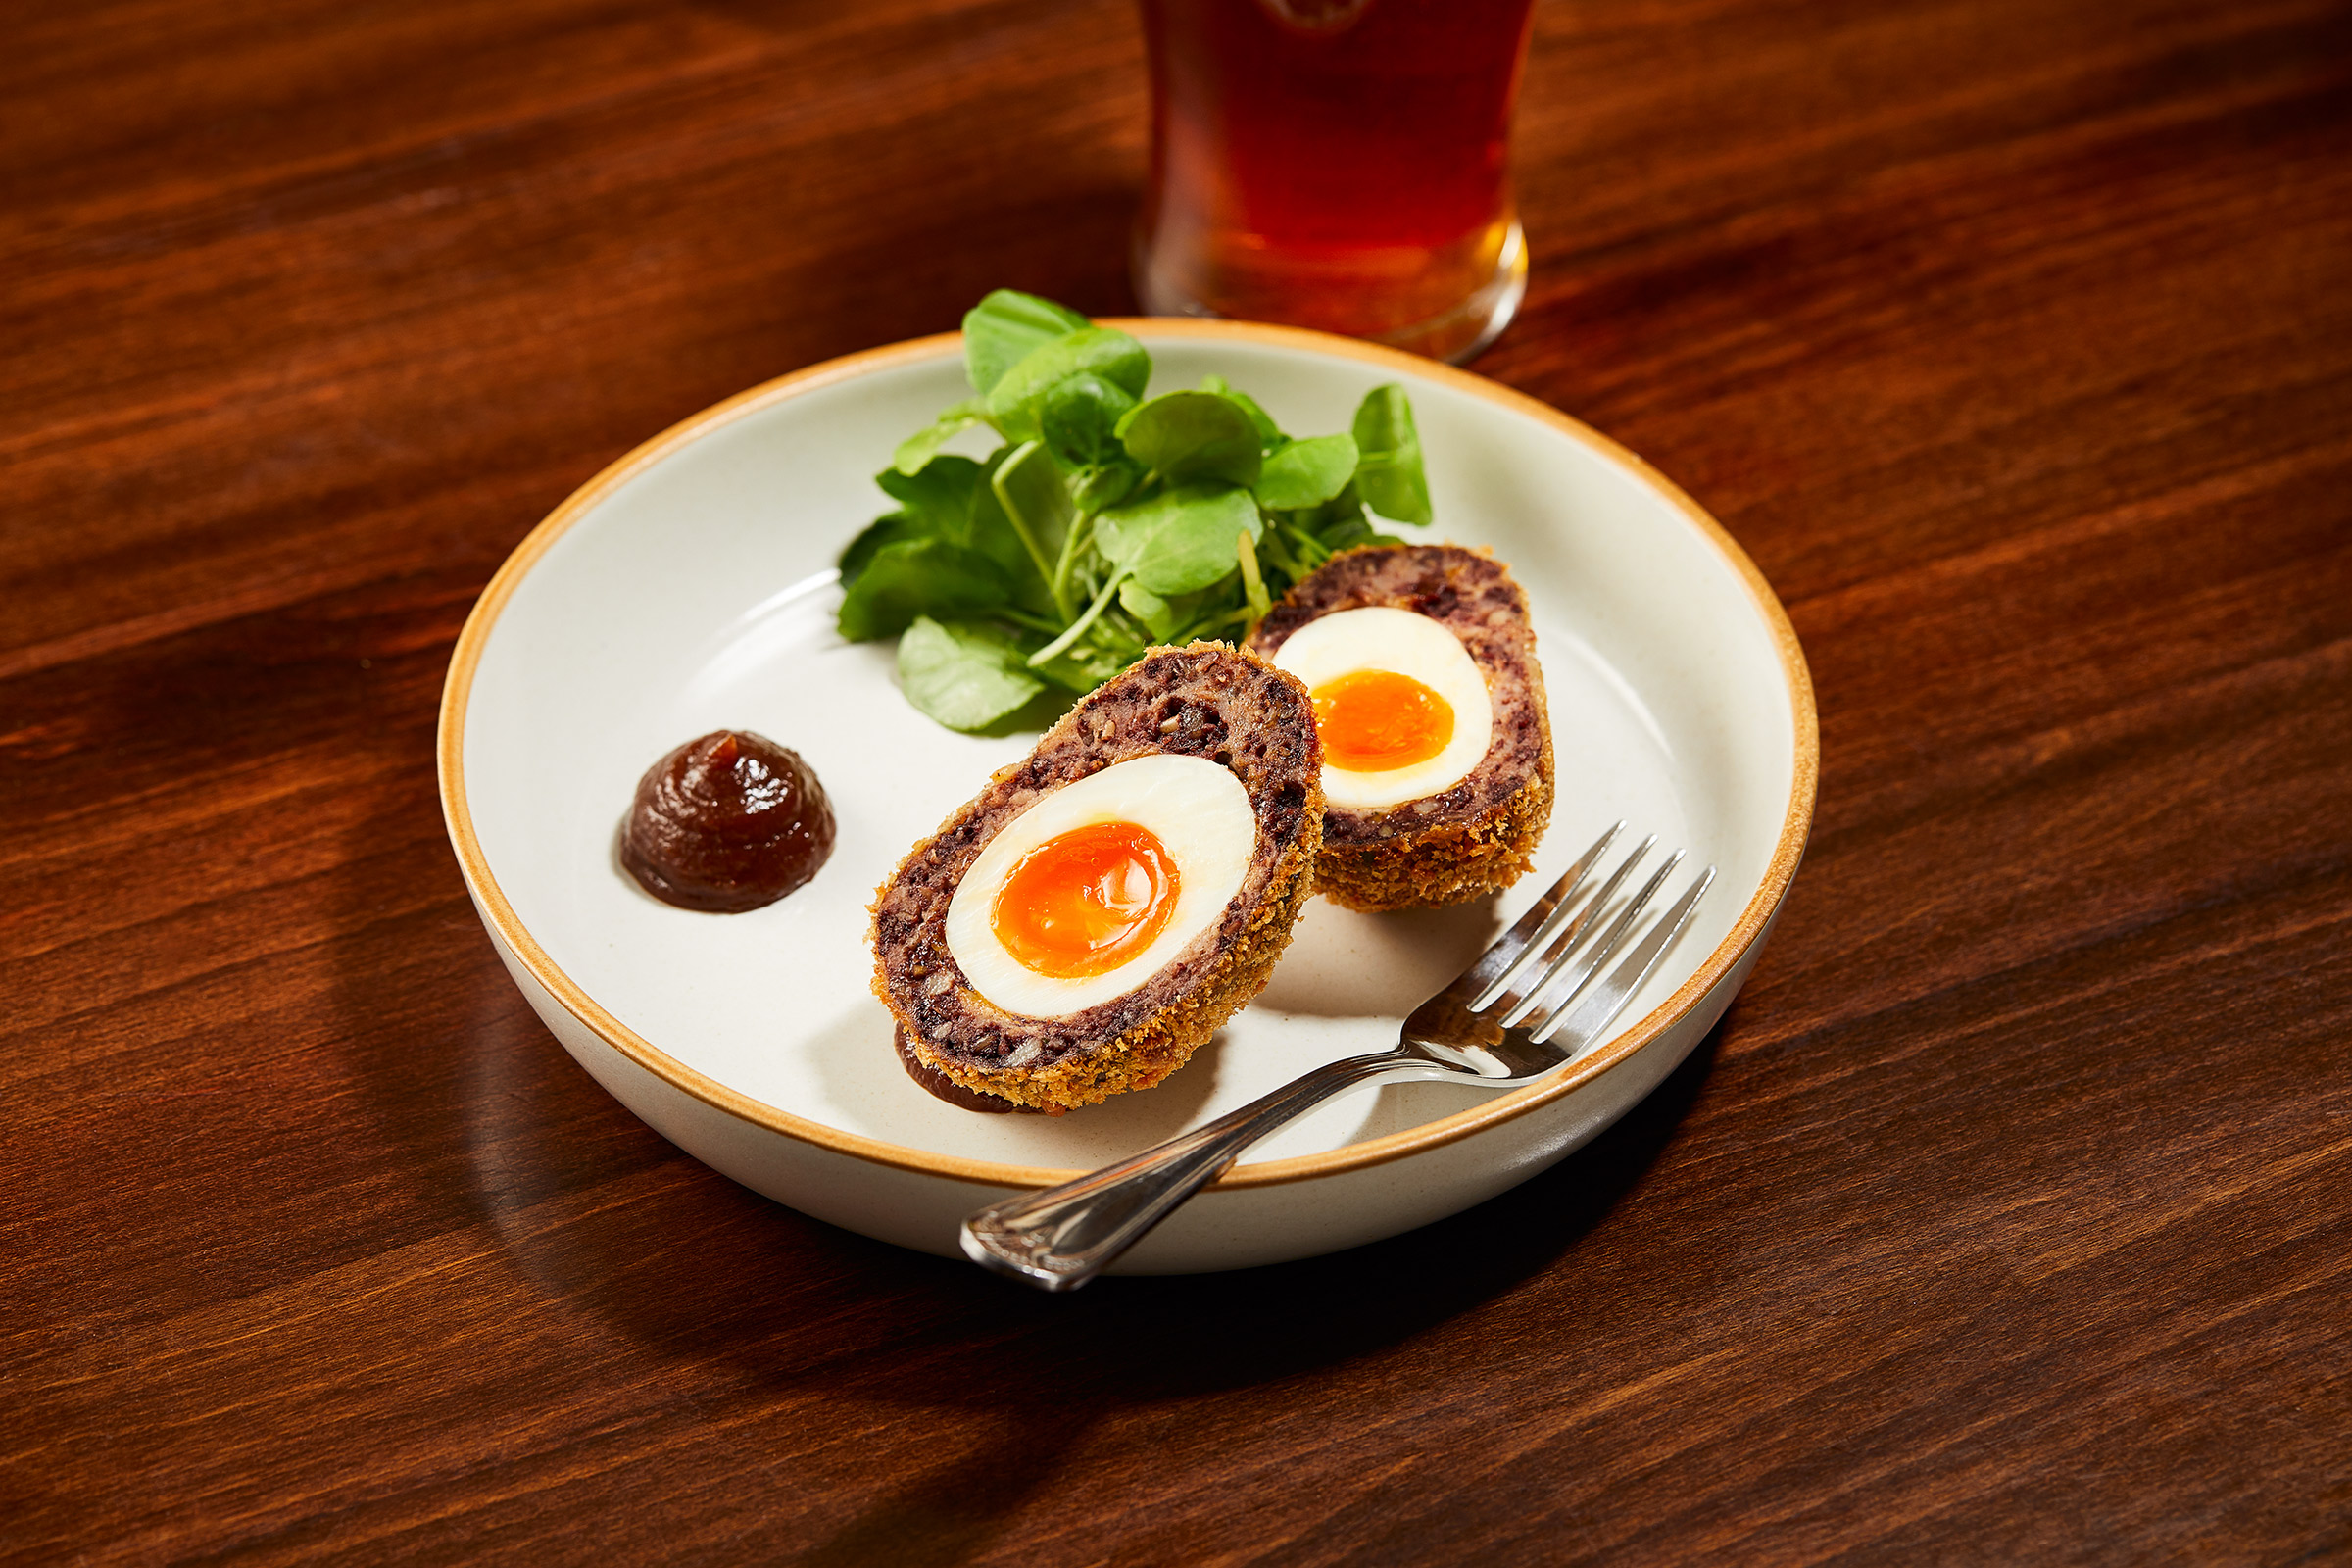 Linden Tree Pub, Black Pudding Scotch Egg, Linden Hall Hotel, food and drink photography, Alastair Ferrier